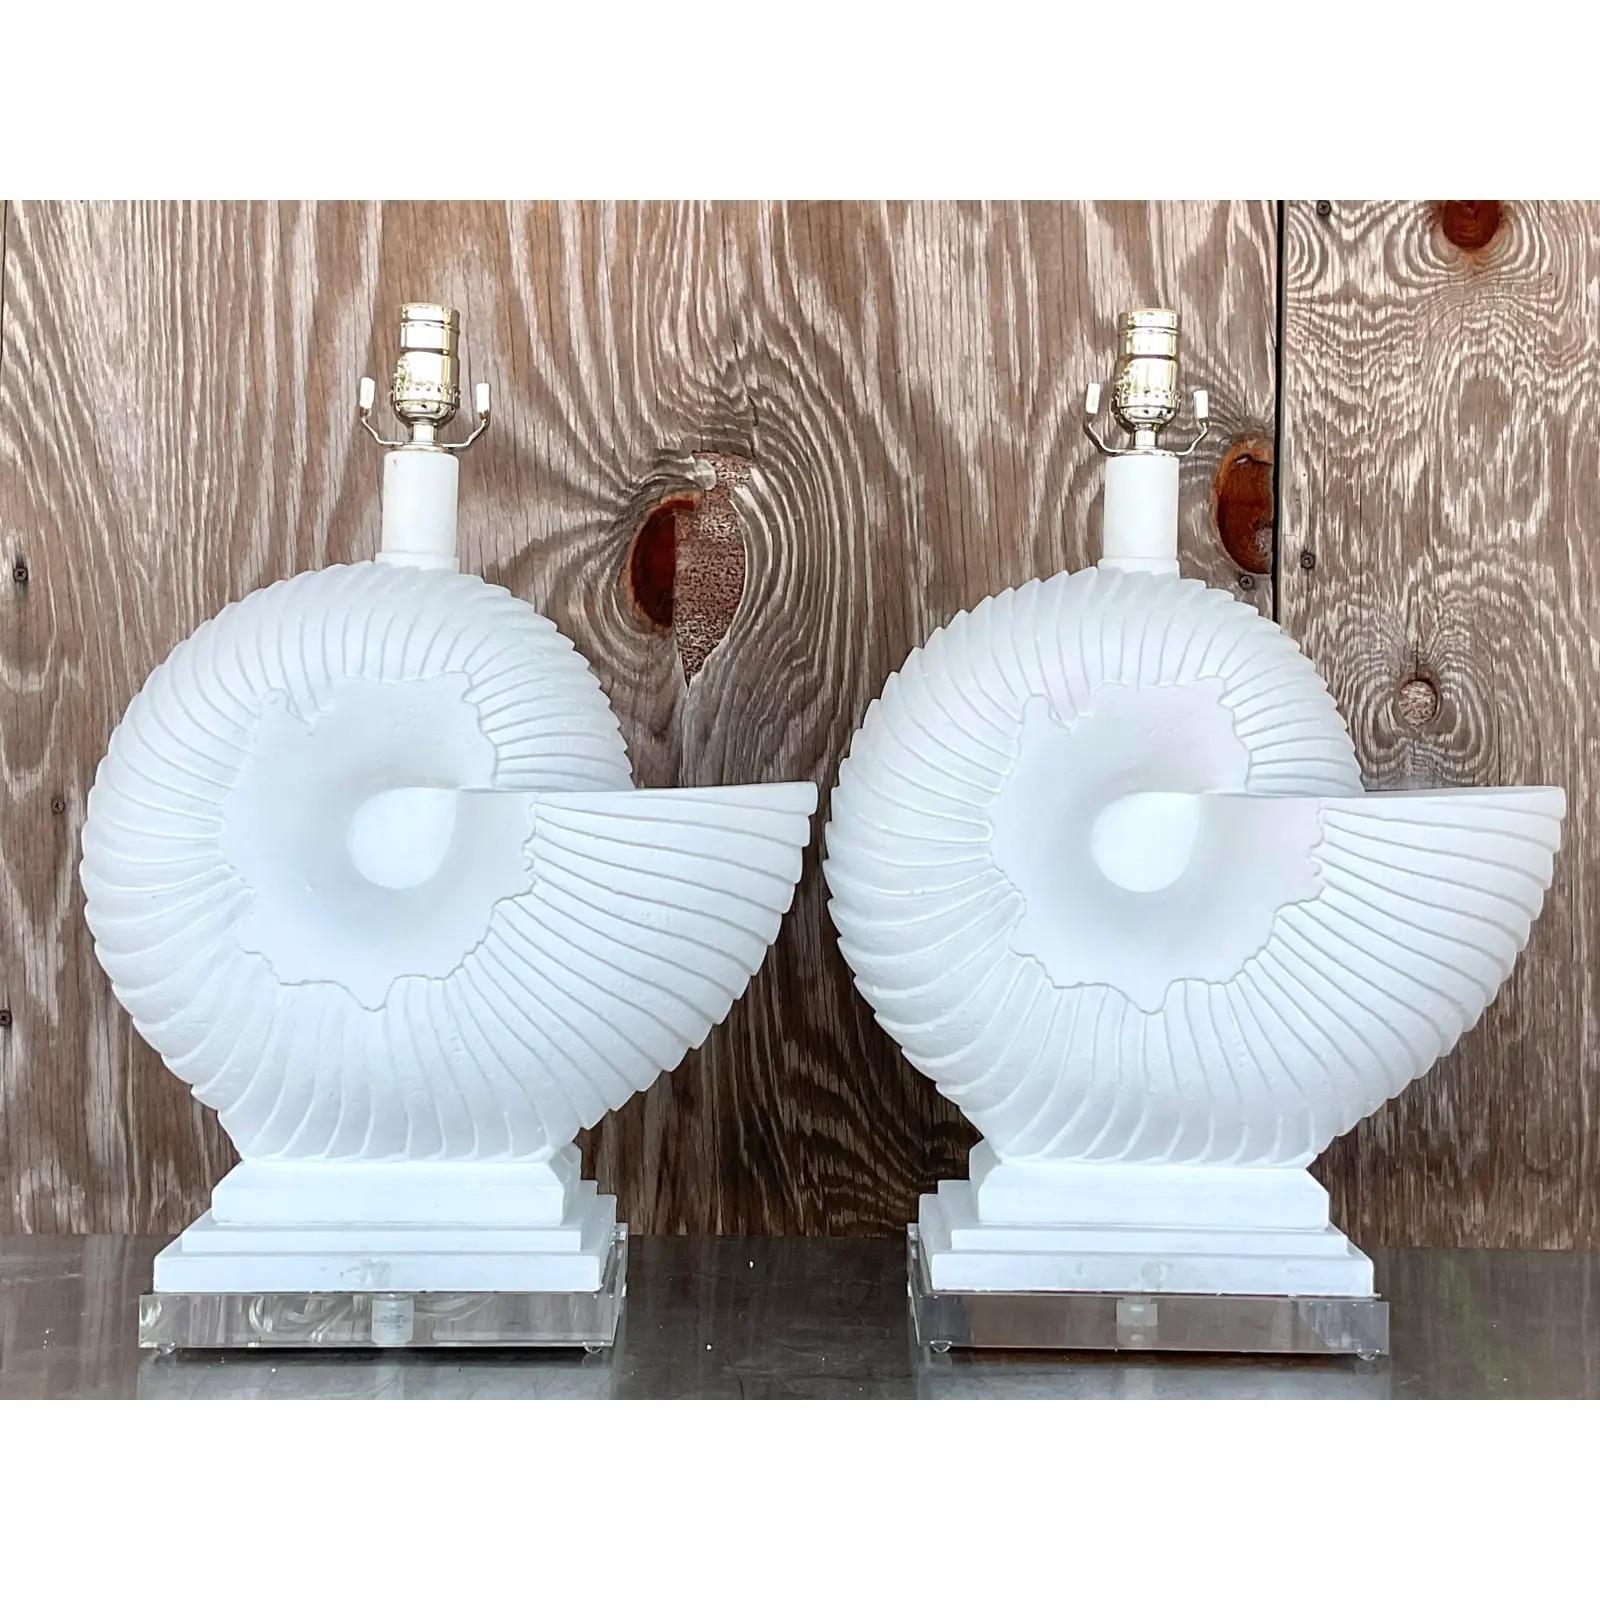 Fantastic pair of vintage Coastal table lamps. Chic nautilus shape with a matte plaster white finish. Fully Restored with all new wiring and chrome hardware. Acquired from a Palm Beach estate.